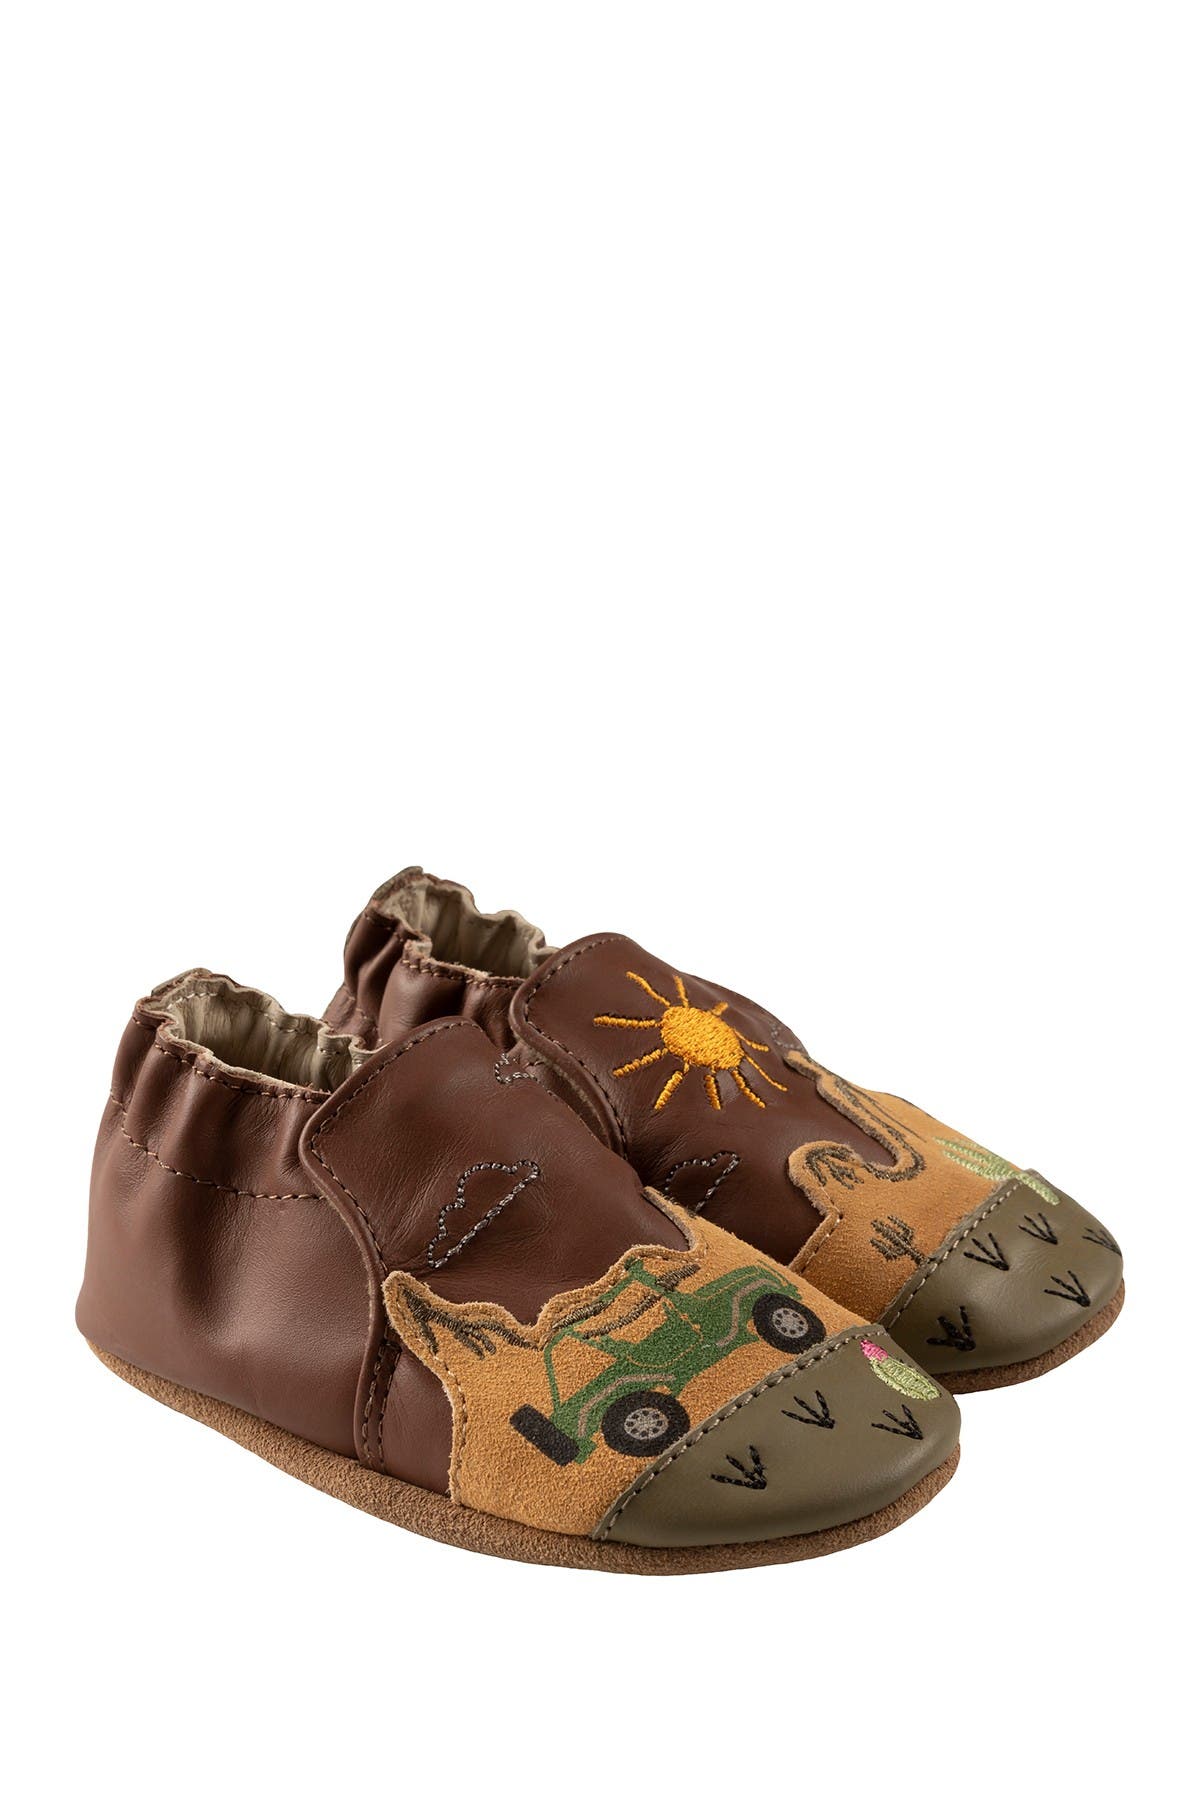 Baby Boys' Shoes | Nordstrom Rack